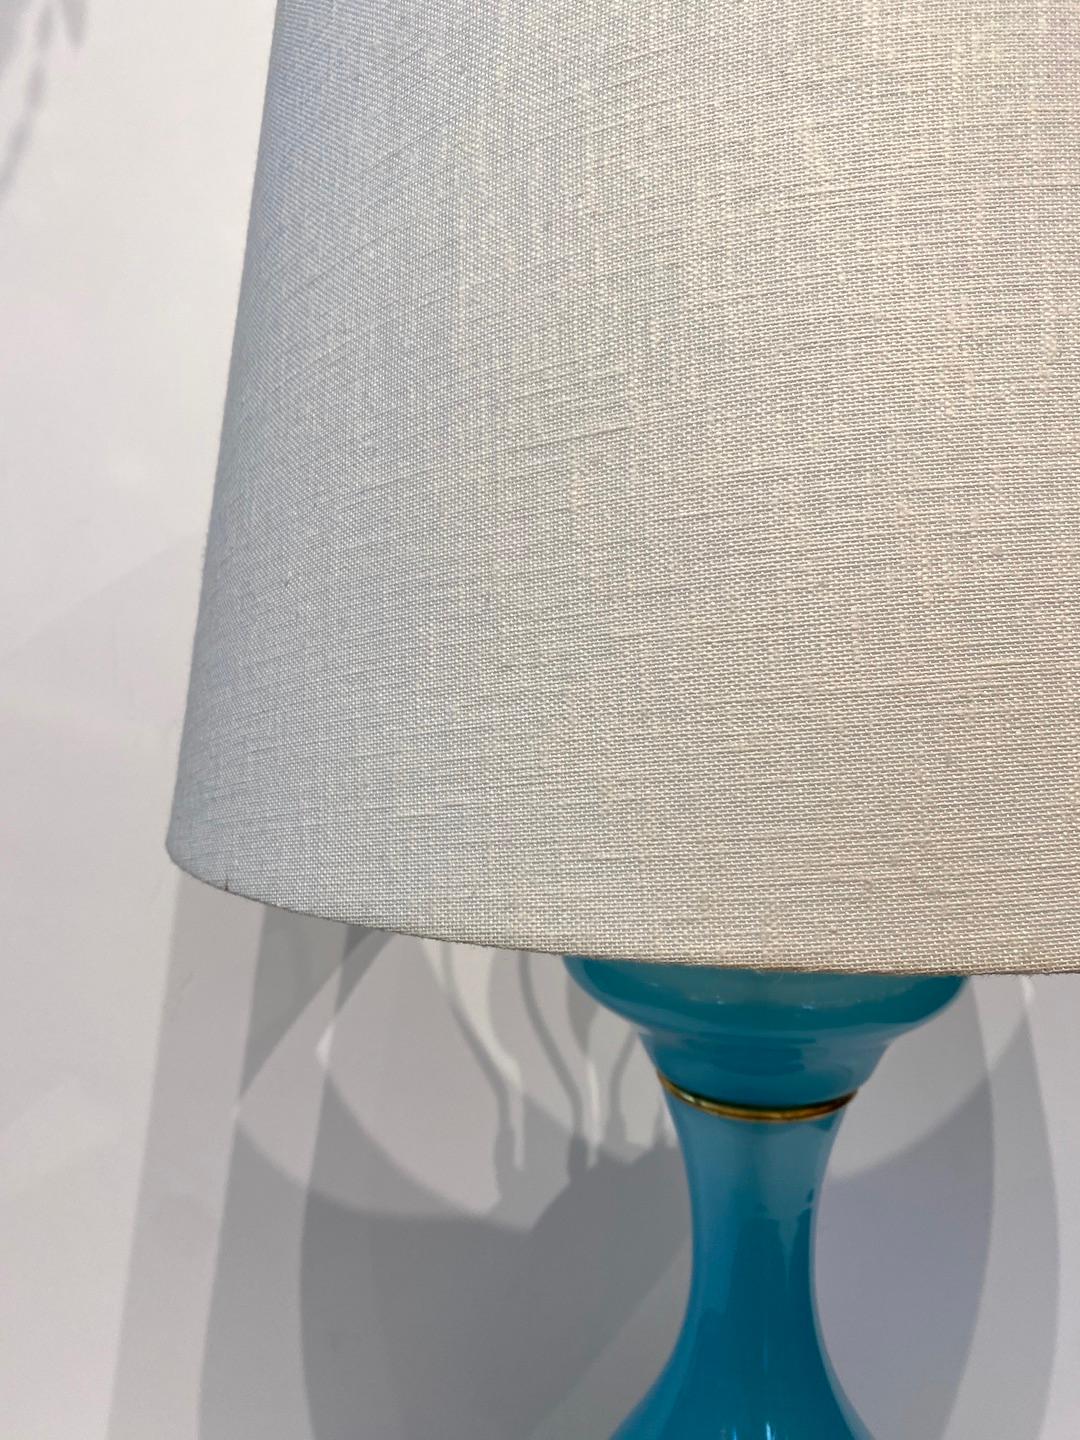 Mid-20th Century French Opaline Lamp For Sale